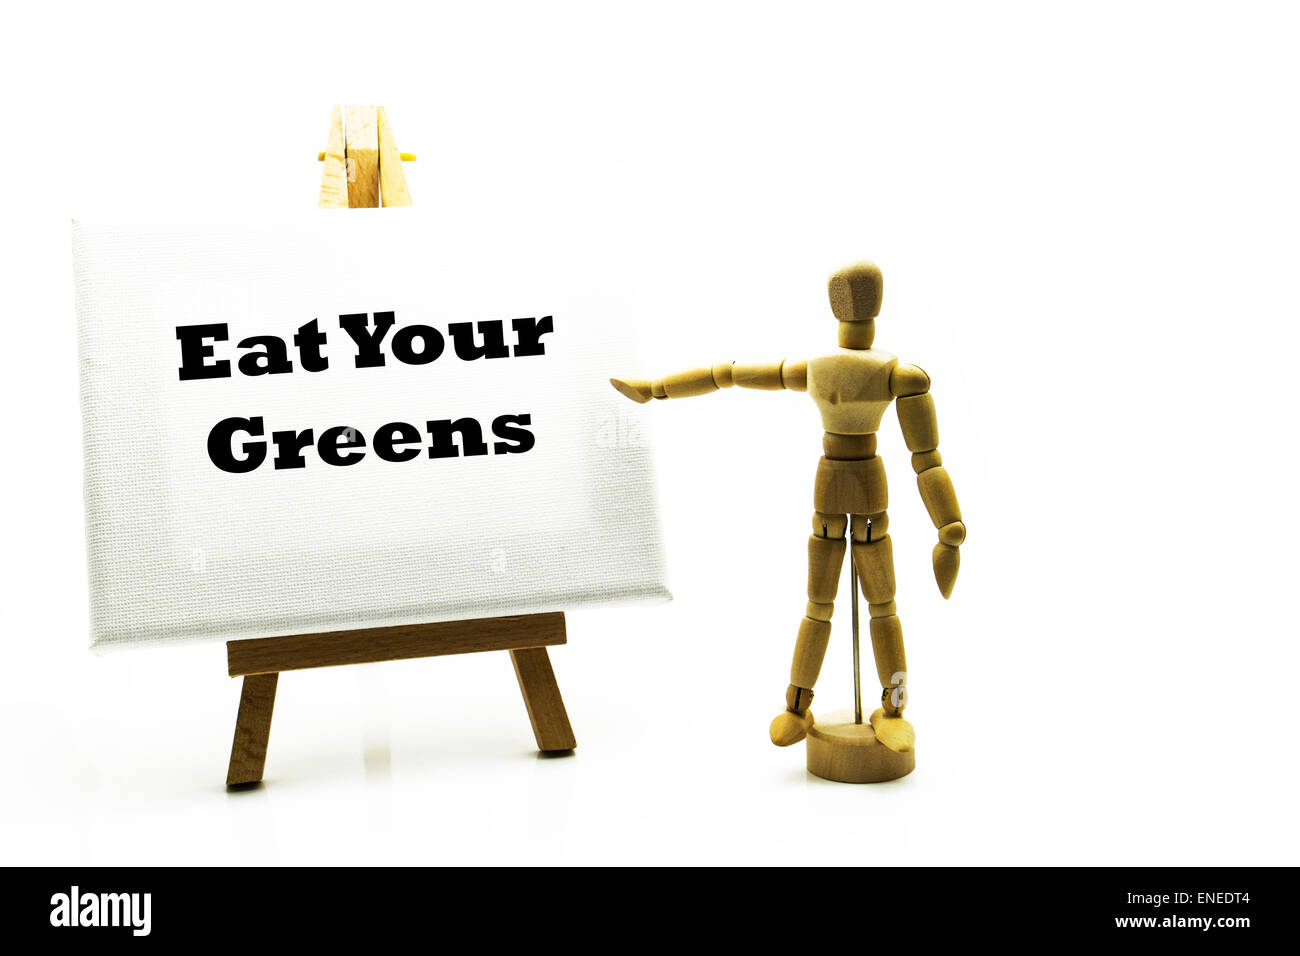 Wooden man with white board pointing at words "eat your greens" healthy eating heath vegetables look after your body lifestyle Stock Photo